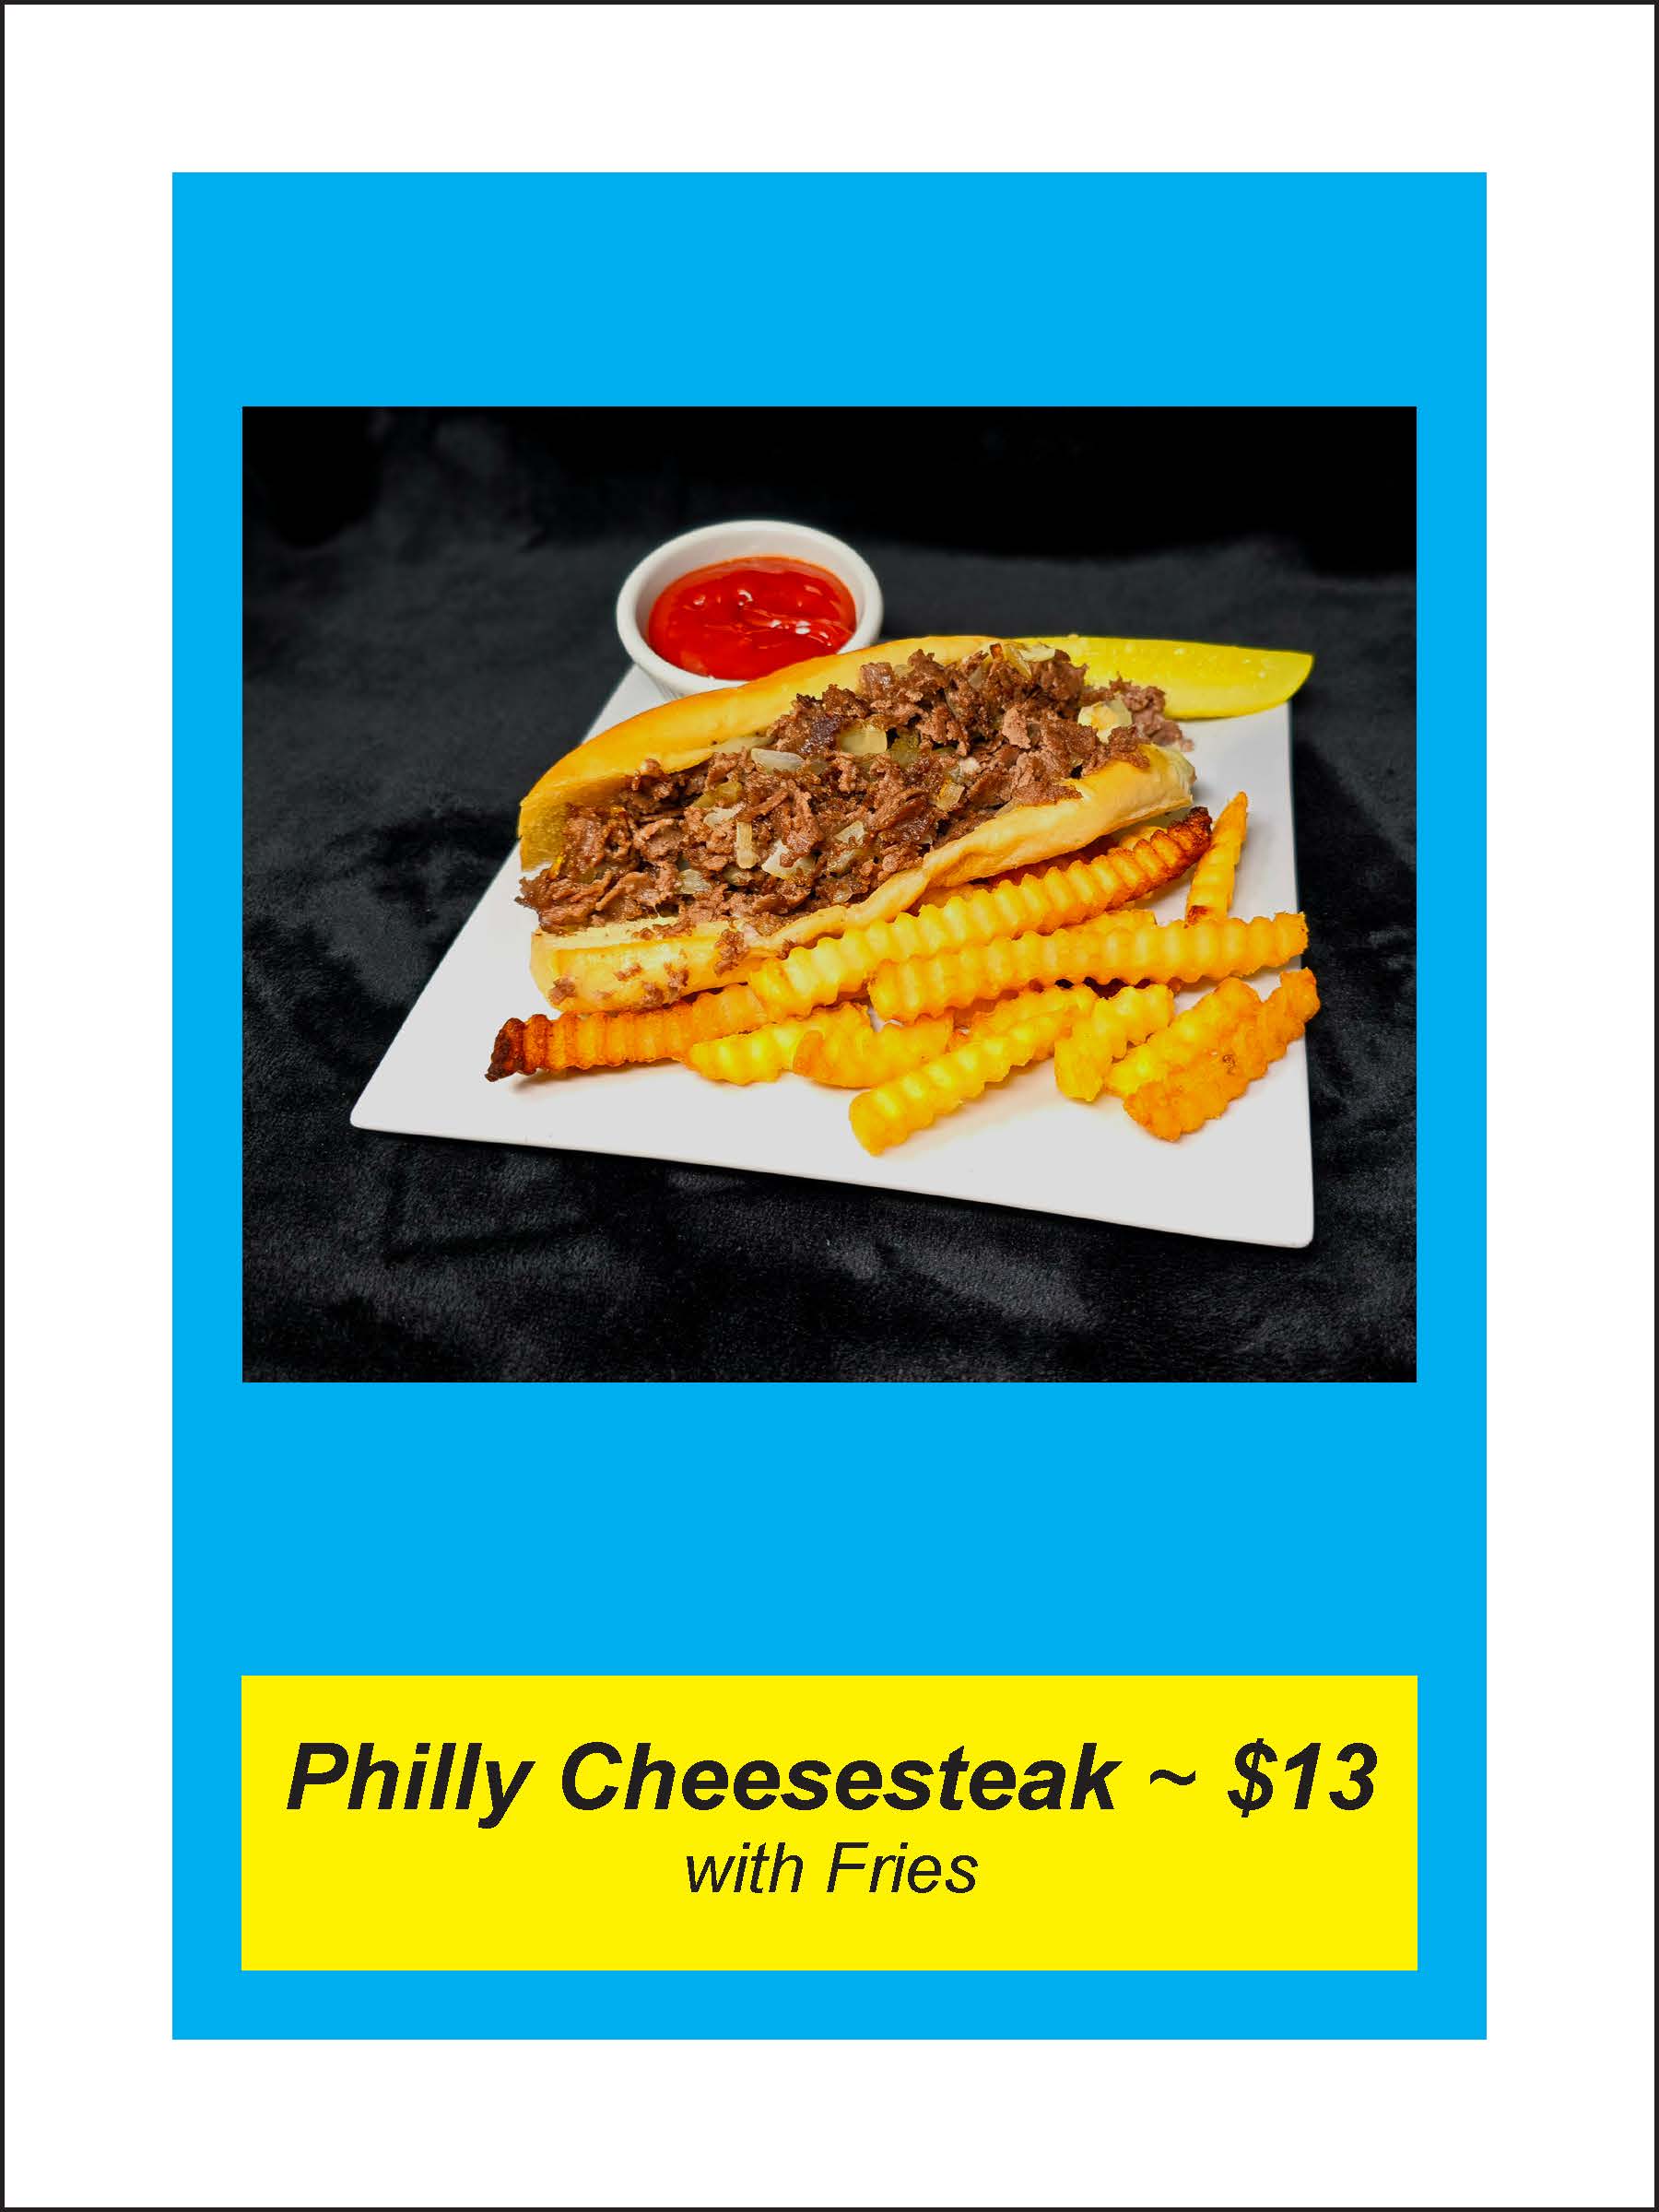 Image of a Philly cheesesteak sandwich with crinkle-cut fries, a pickle, and a small cup of ketchup on a white plate. The text below reads: "Philly Cheesesteak ~ $13 with Fries".